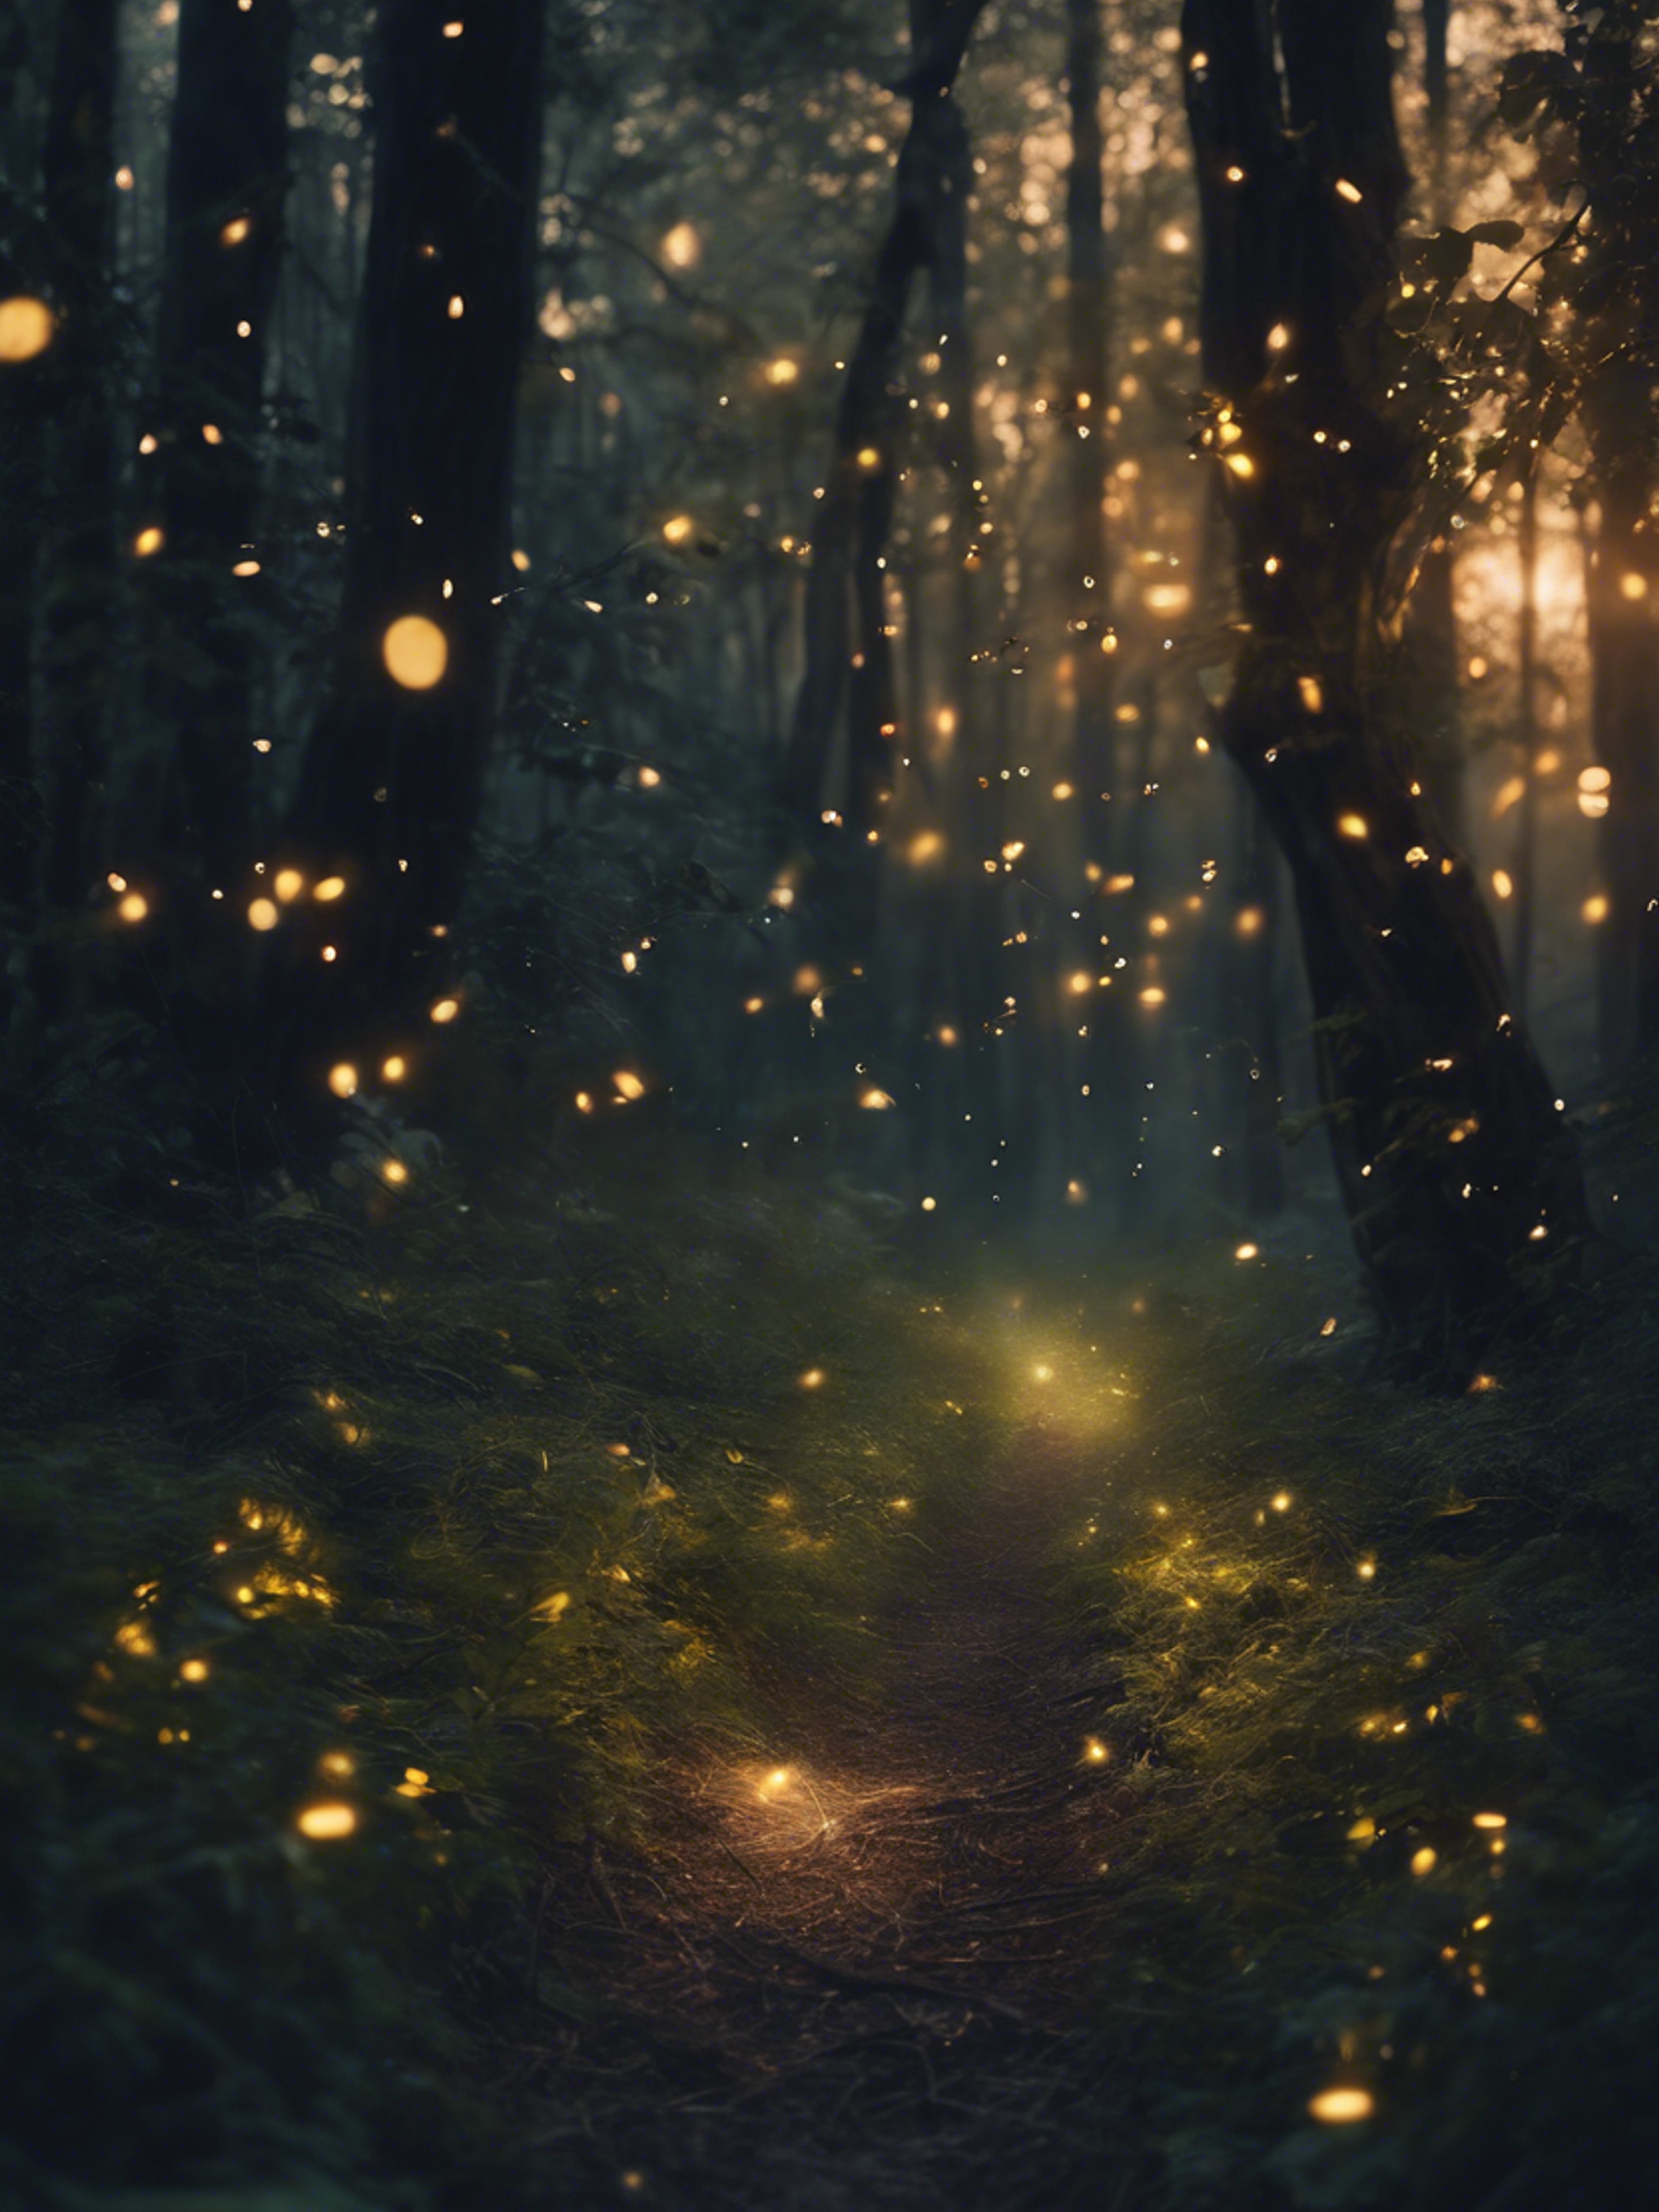 An enigmatic dark forest with fireflies glowing, set in a dream.壁紙[1695aad10dba44689bbb]